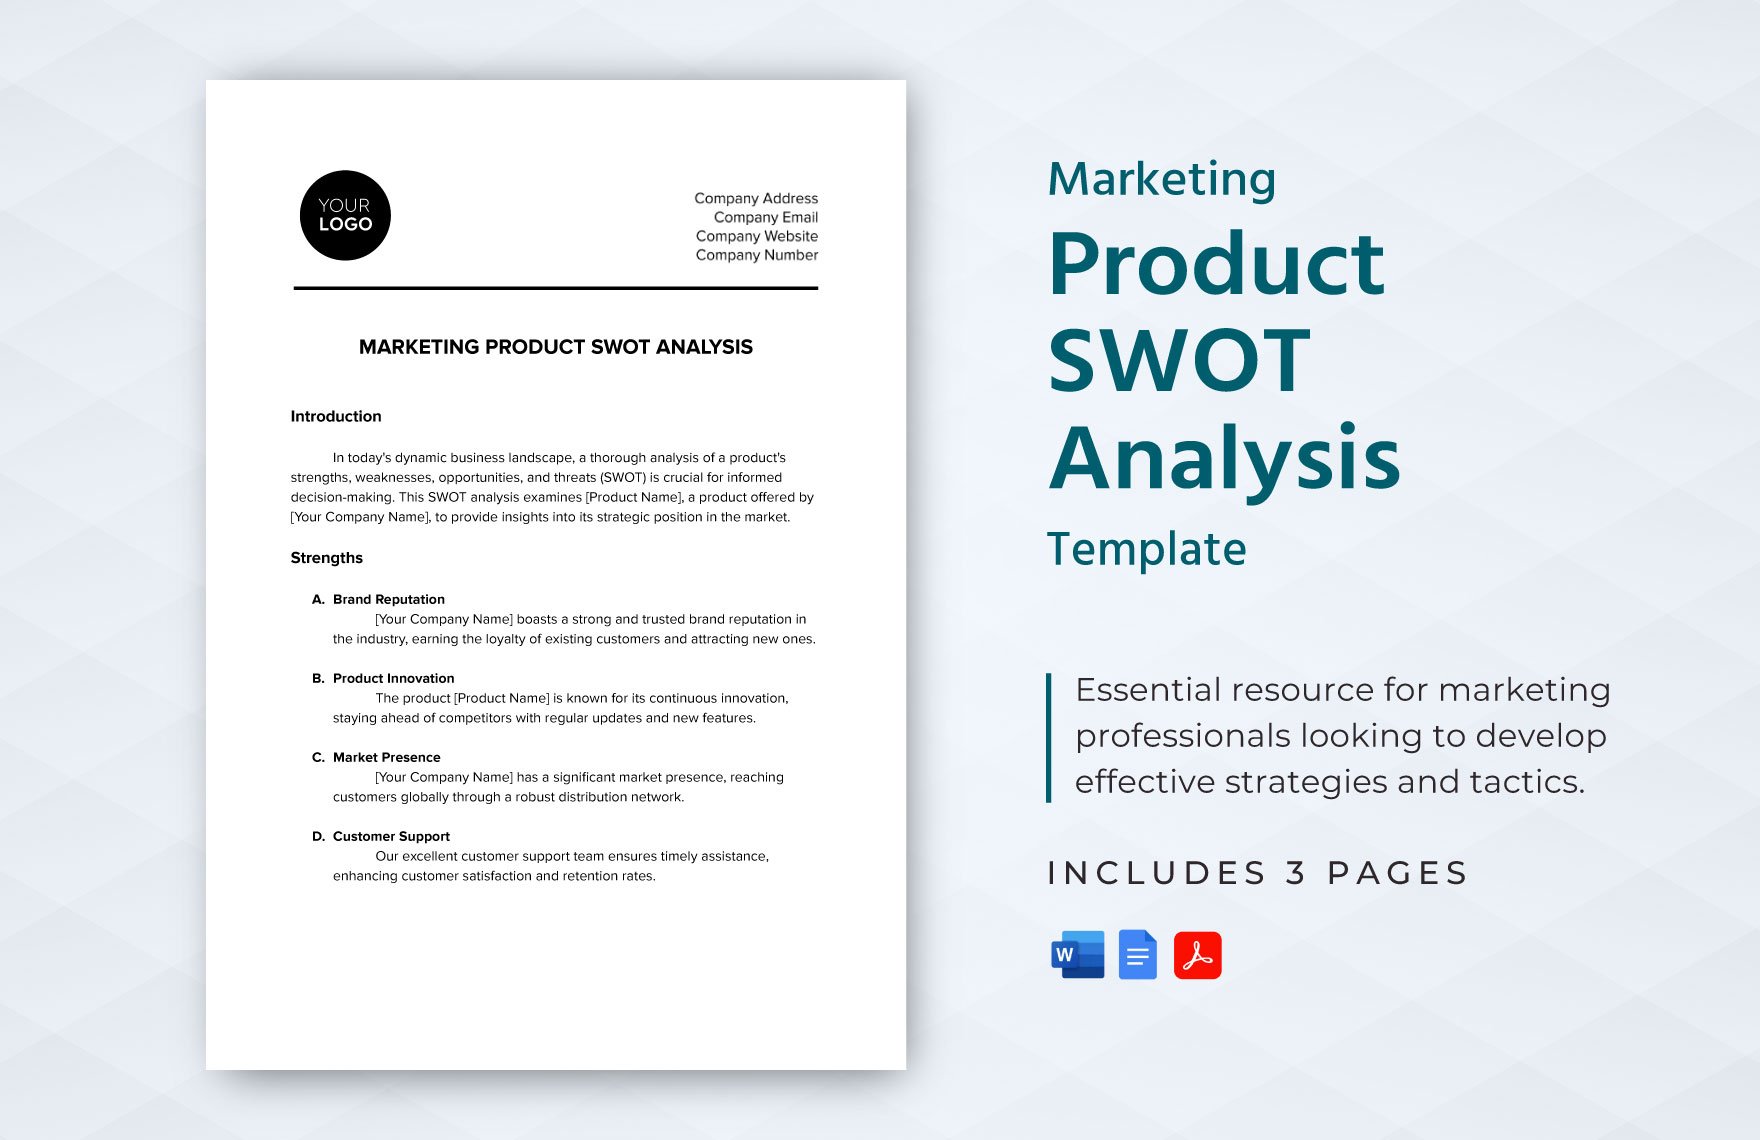 Marketing Product SWOT Analysis Template in Word, Google Docs, PDF